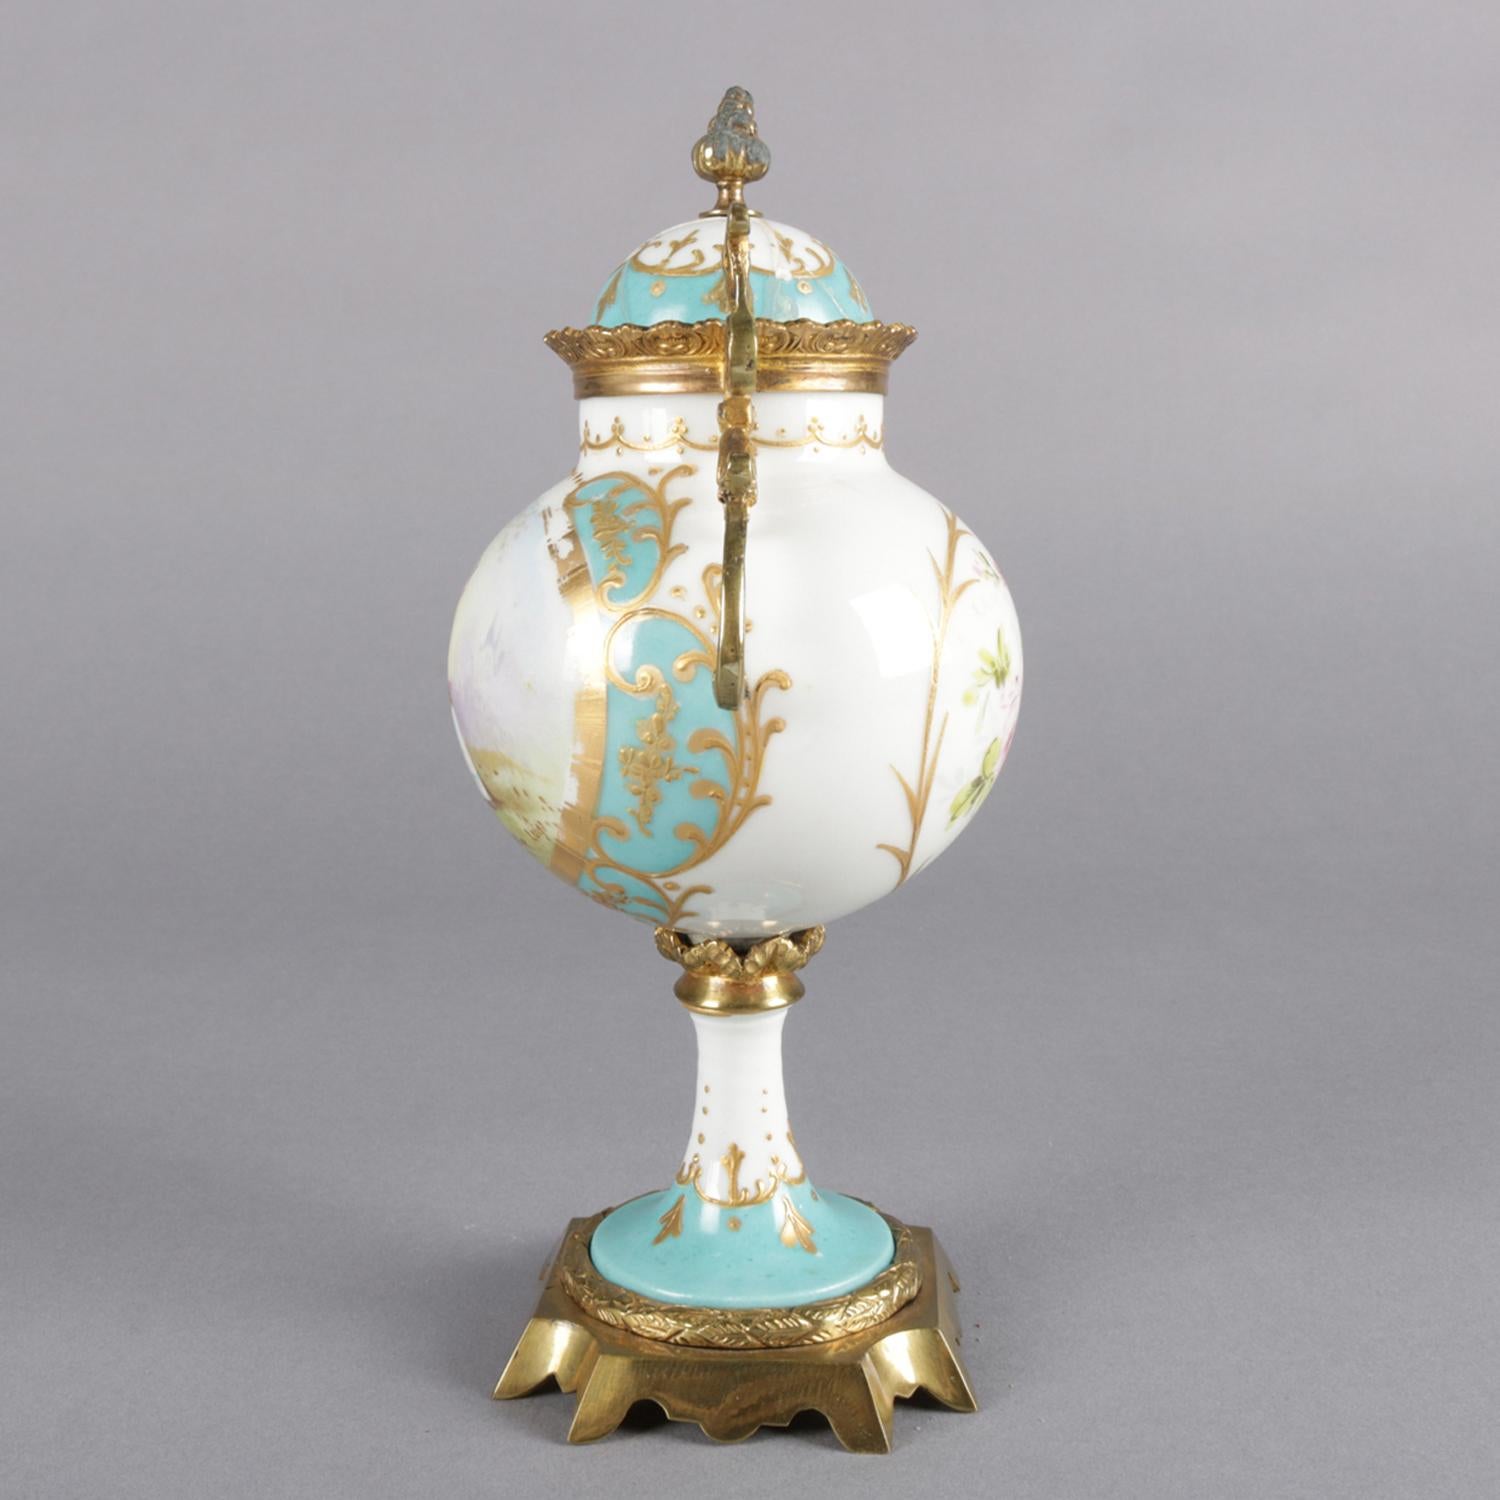 Antique French Sevres school porcelain lidded urn features hand painted reserves of courting scene signed Lugi and en verso floral spray, gilt scroll highlights throughout and with bronze attachments, 19th century

Measures: 9